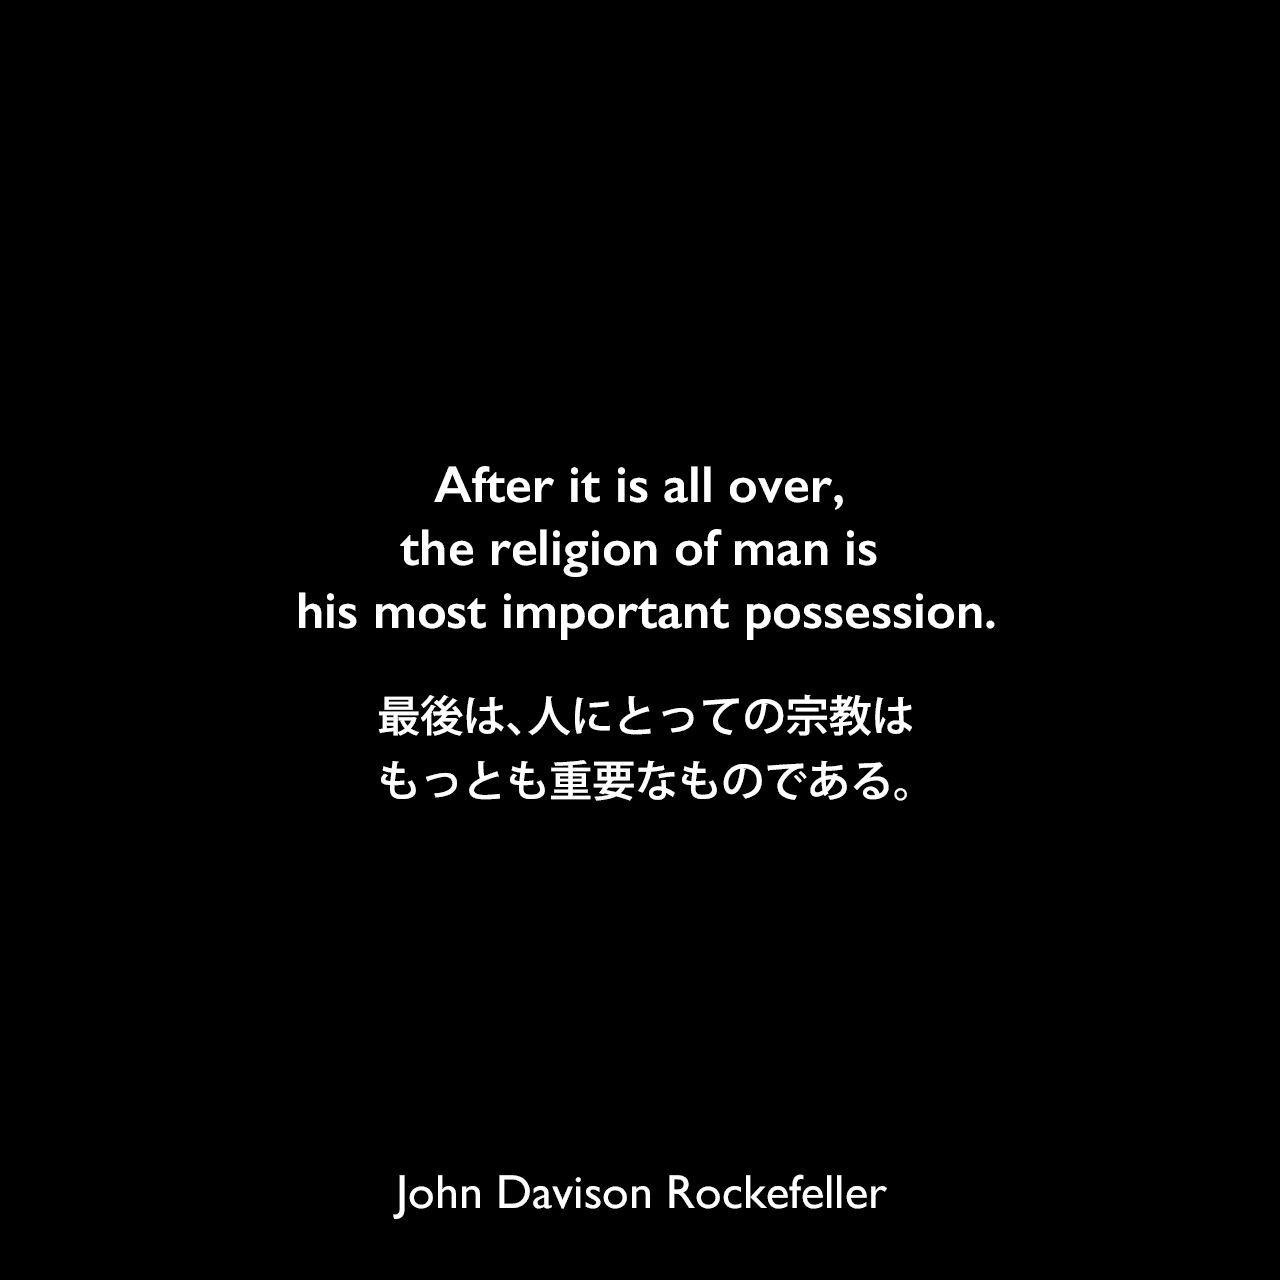 After it is all over, the religion of man is his most important possession.最後は、人にとっての宗教はもっとも重要なものである。John Davison Rockefeller